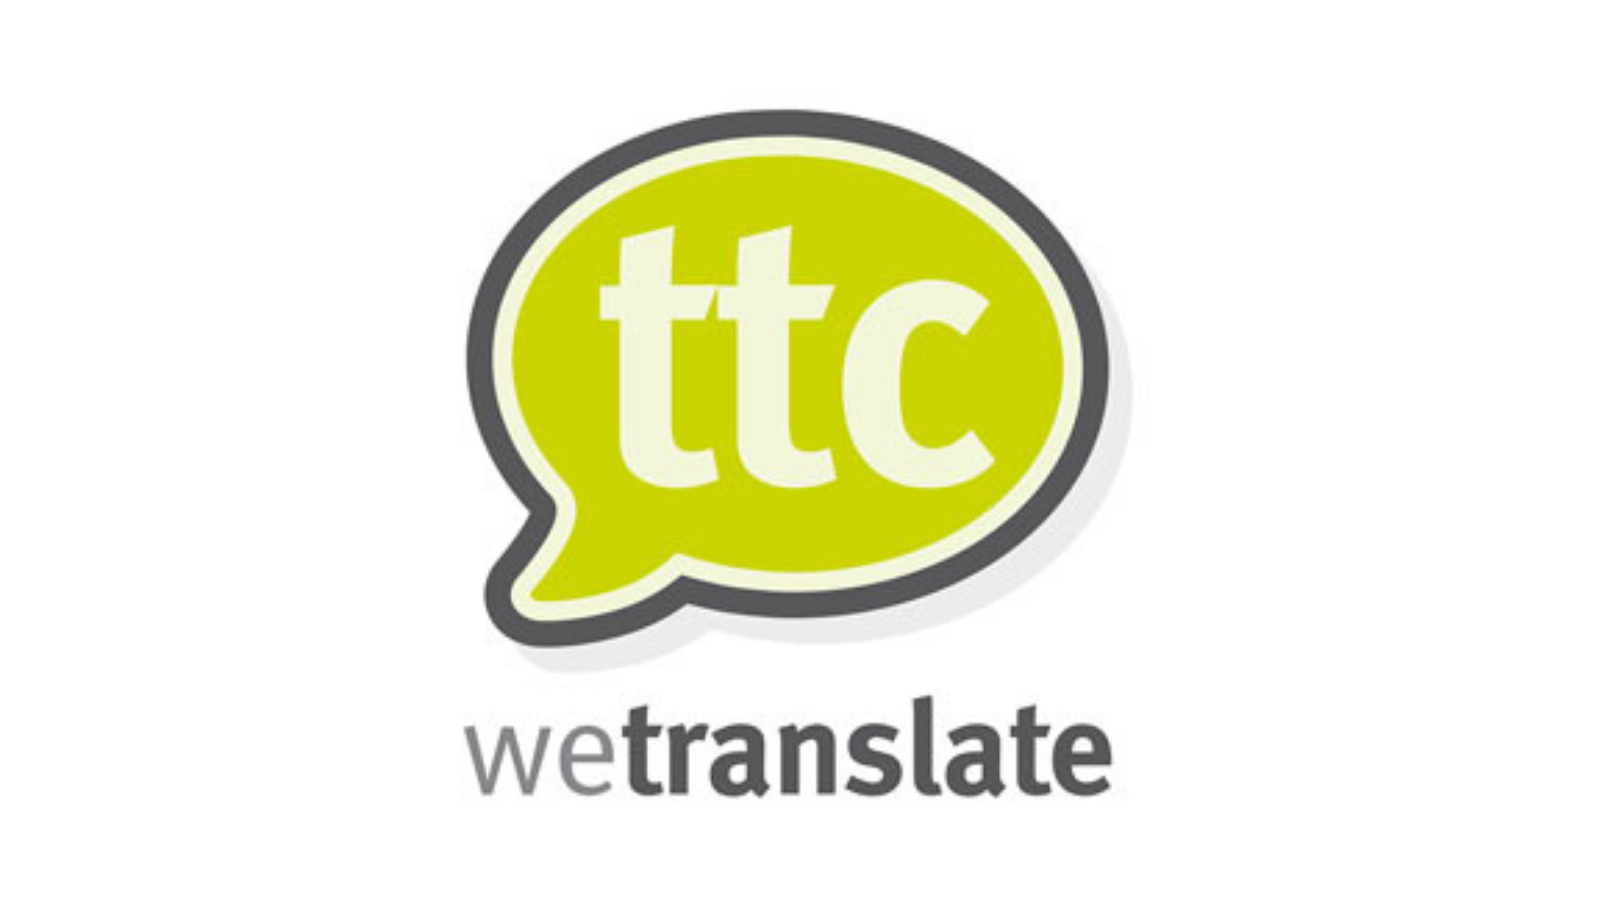 TTC wetranslate Is the ATC’s Member of the Month